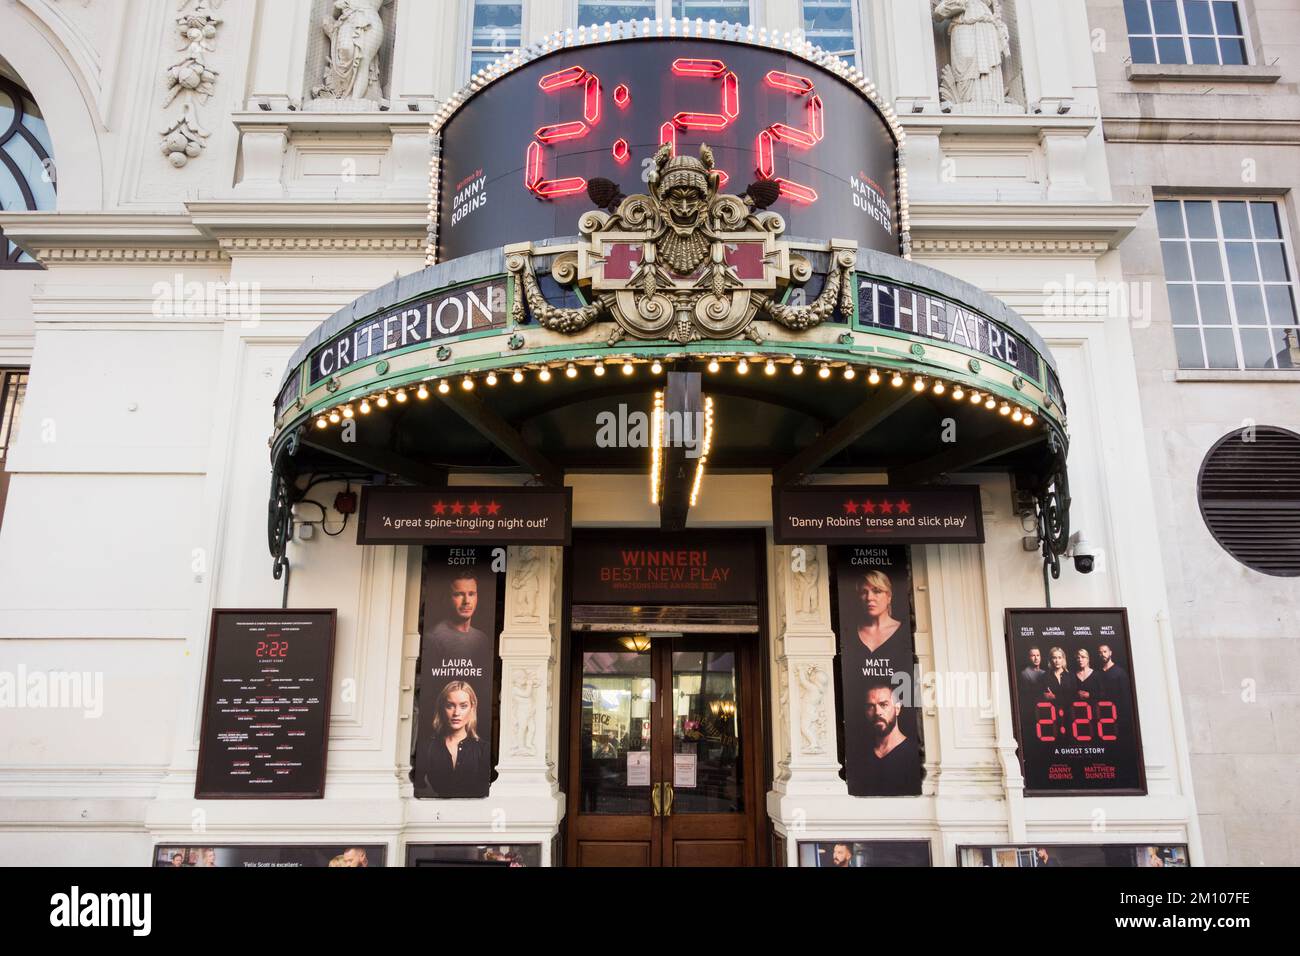 The entrance to the Criterion Theatre on Piccadilly Circus in London's West End, England, UK Stock Photo